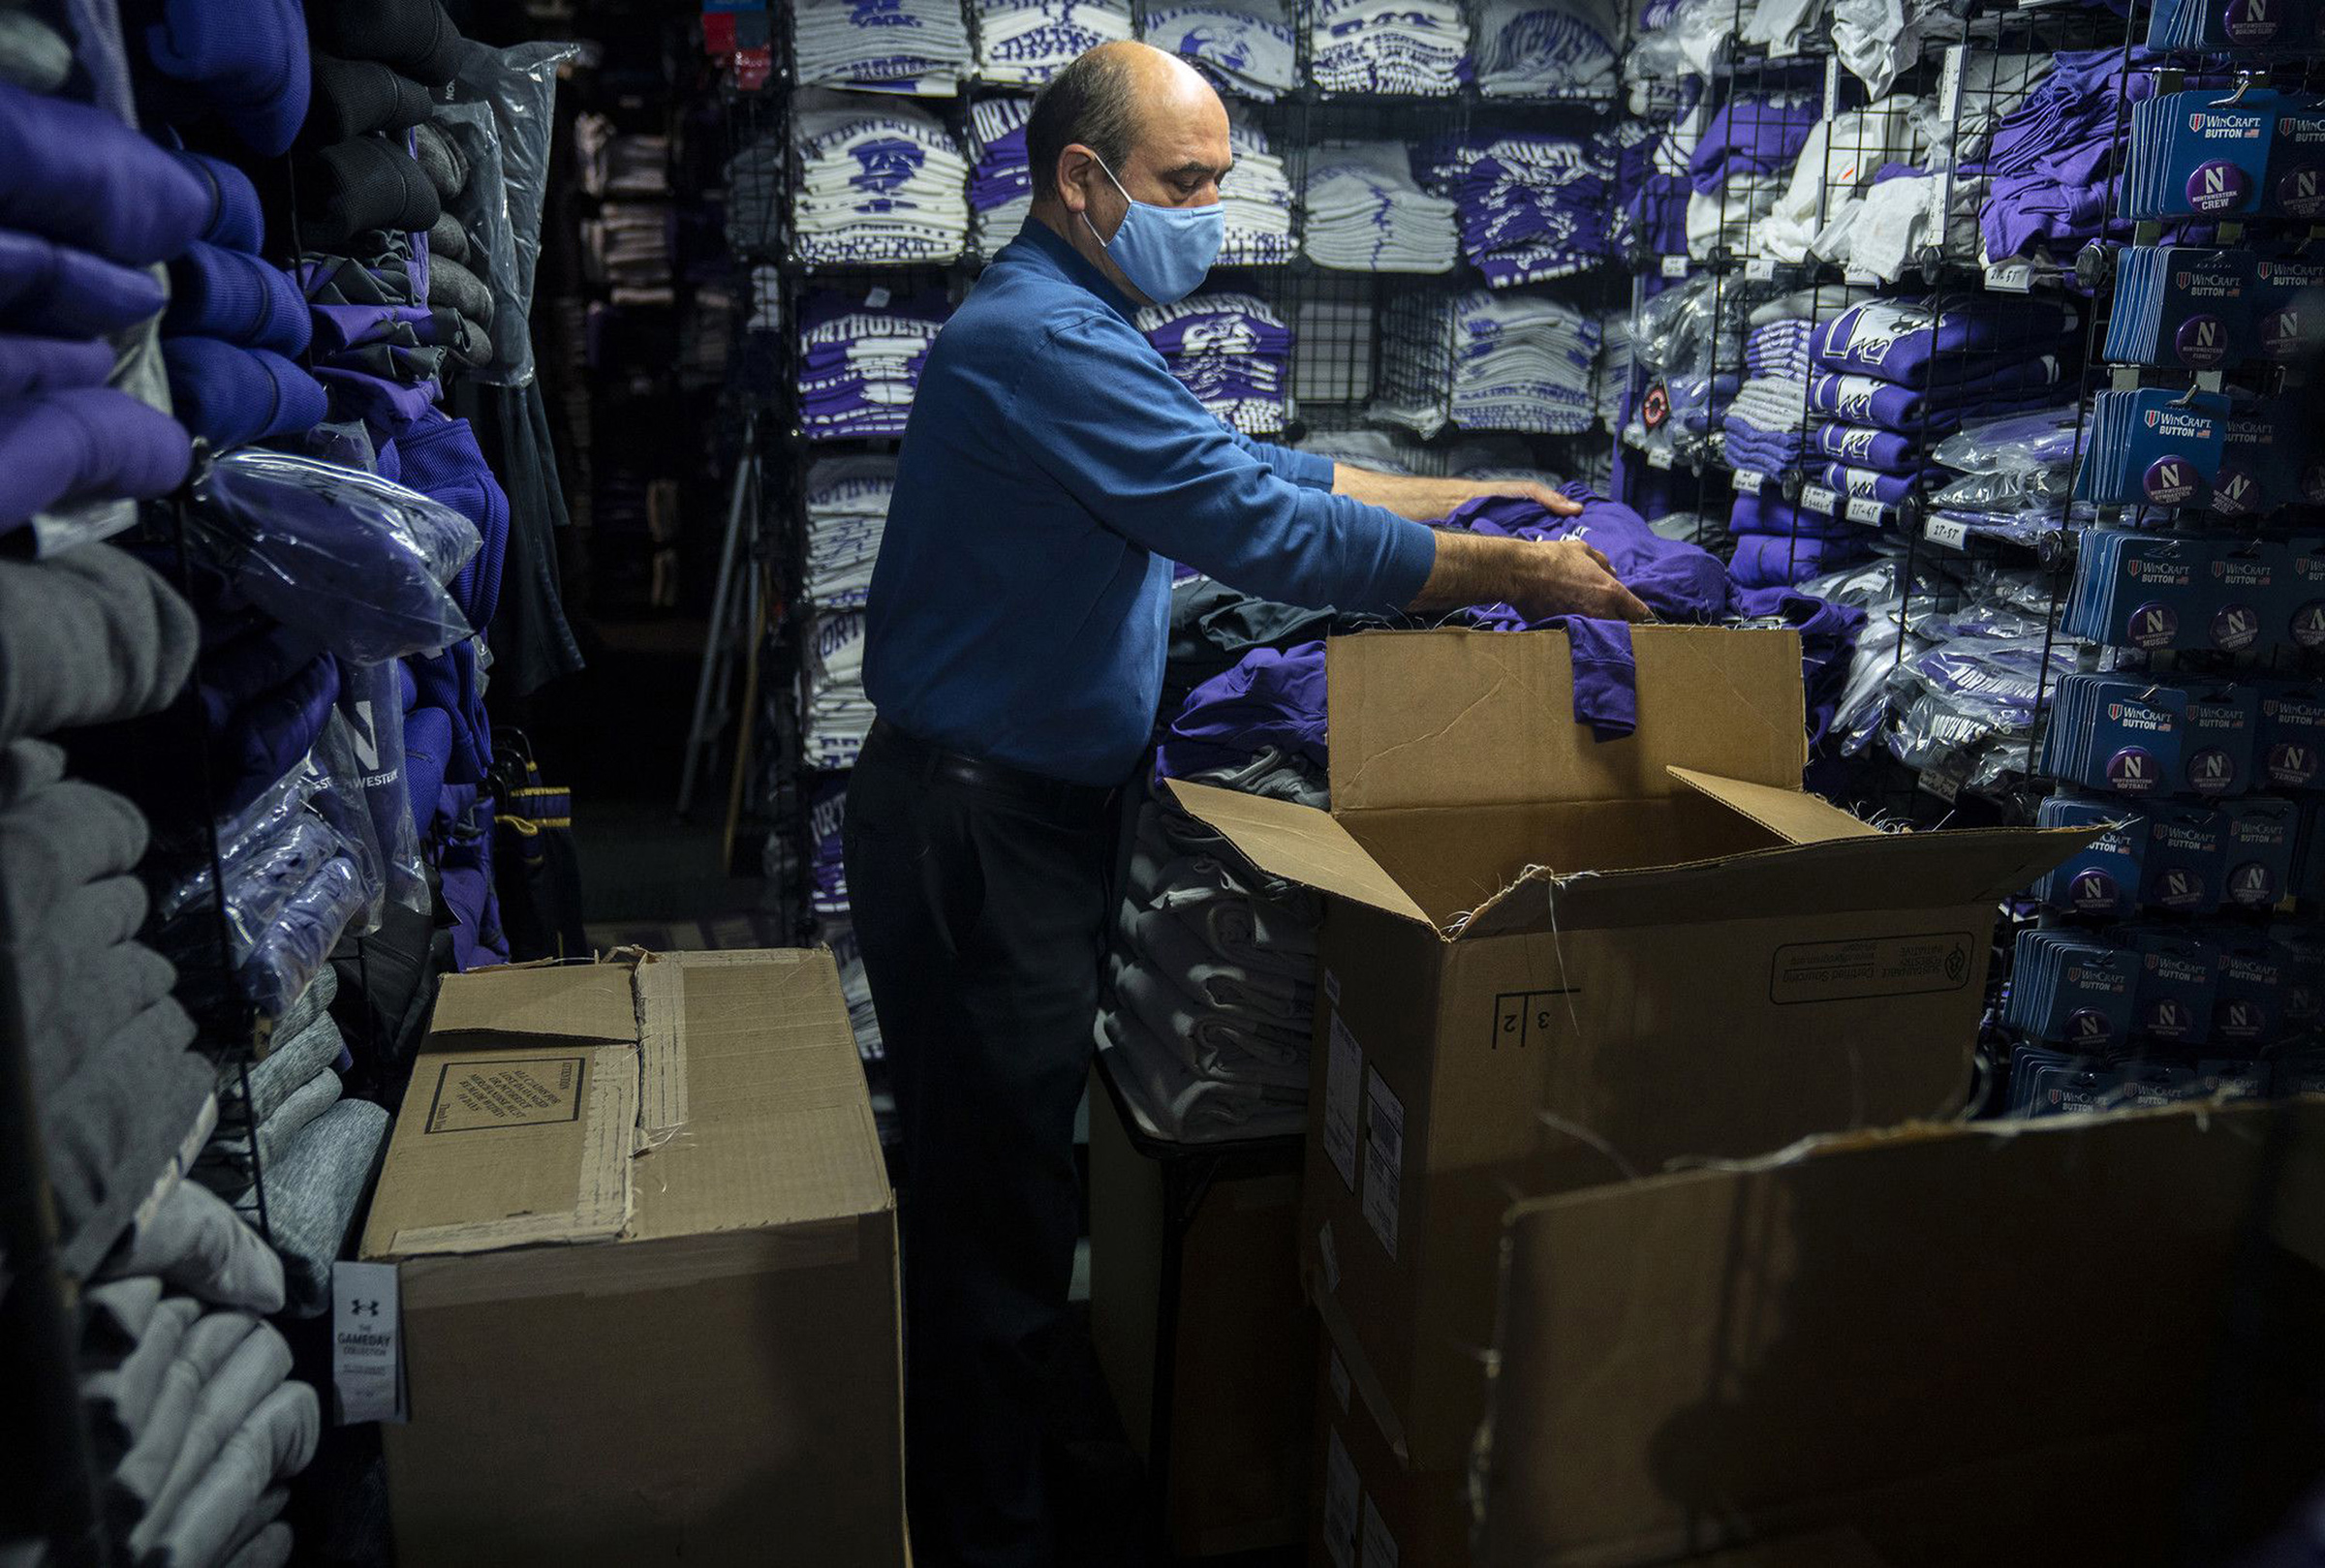 David Haghnaji, owner of Campus Gear in downtown Evanston, Ill., stocks another of his locations—The Locker Room, across from Ryan Field—with new Northwestern gear on Oct. 15, 2020.